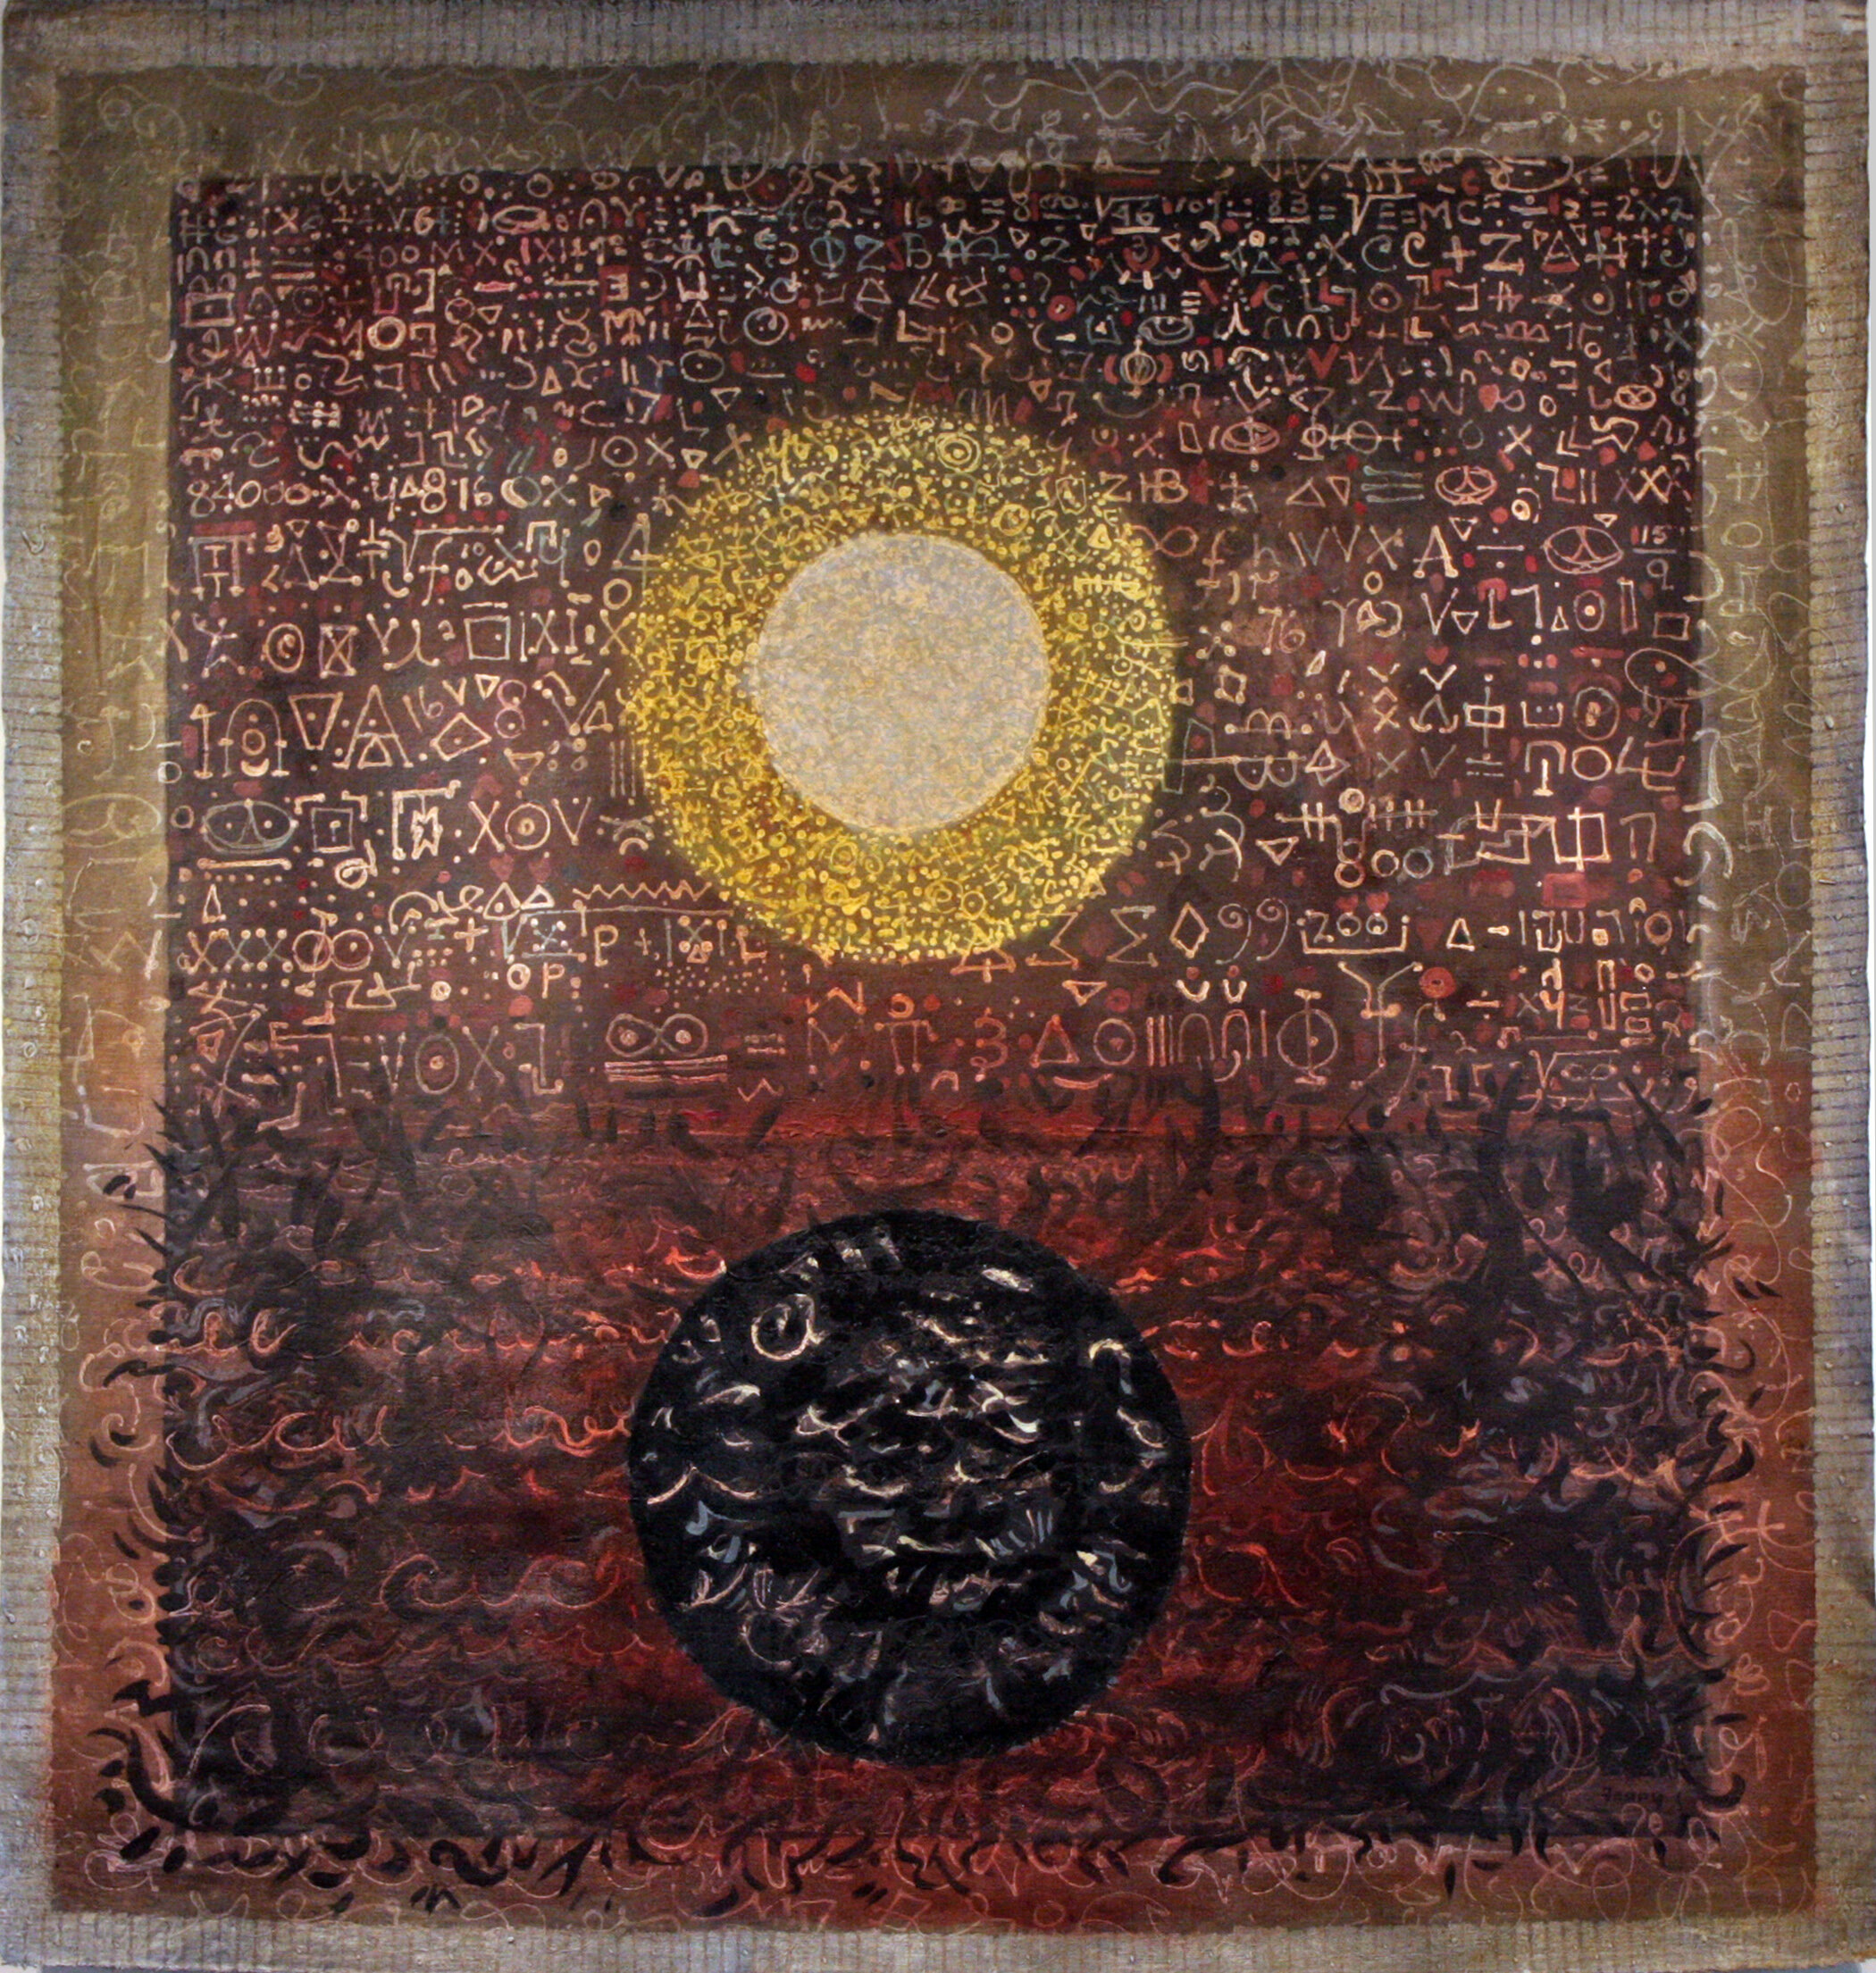 MICHAEL FRARY, Moon and Numbers #41, Tapestry, Collection of the Grace Museum